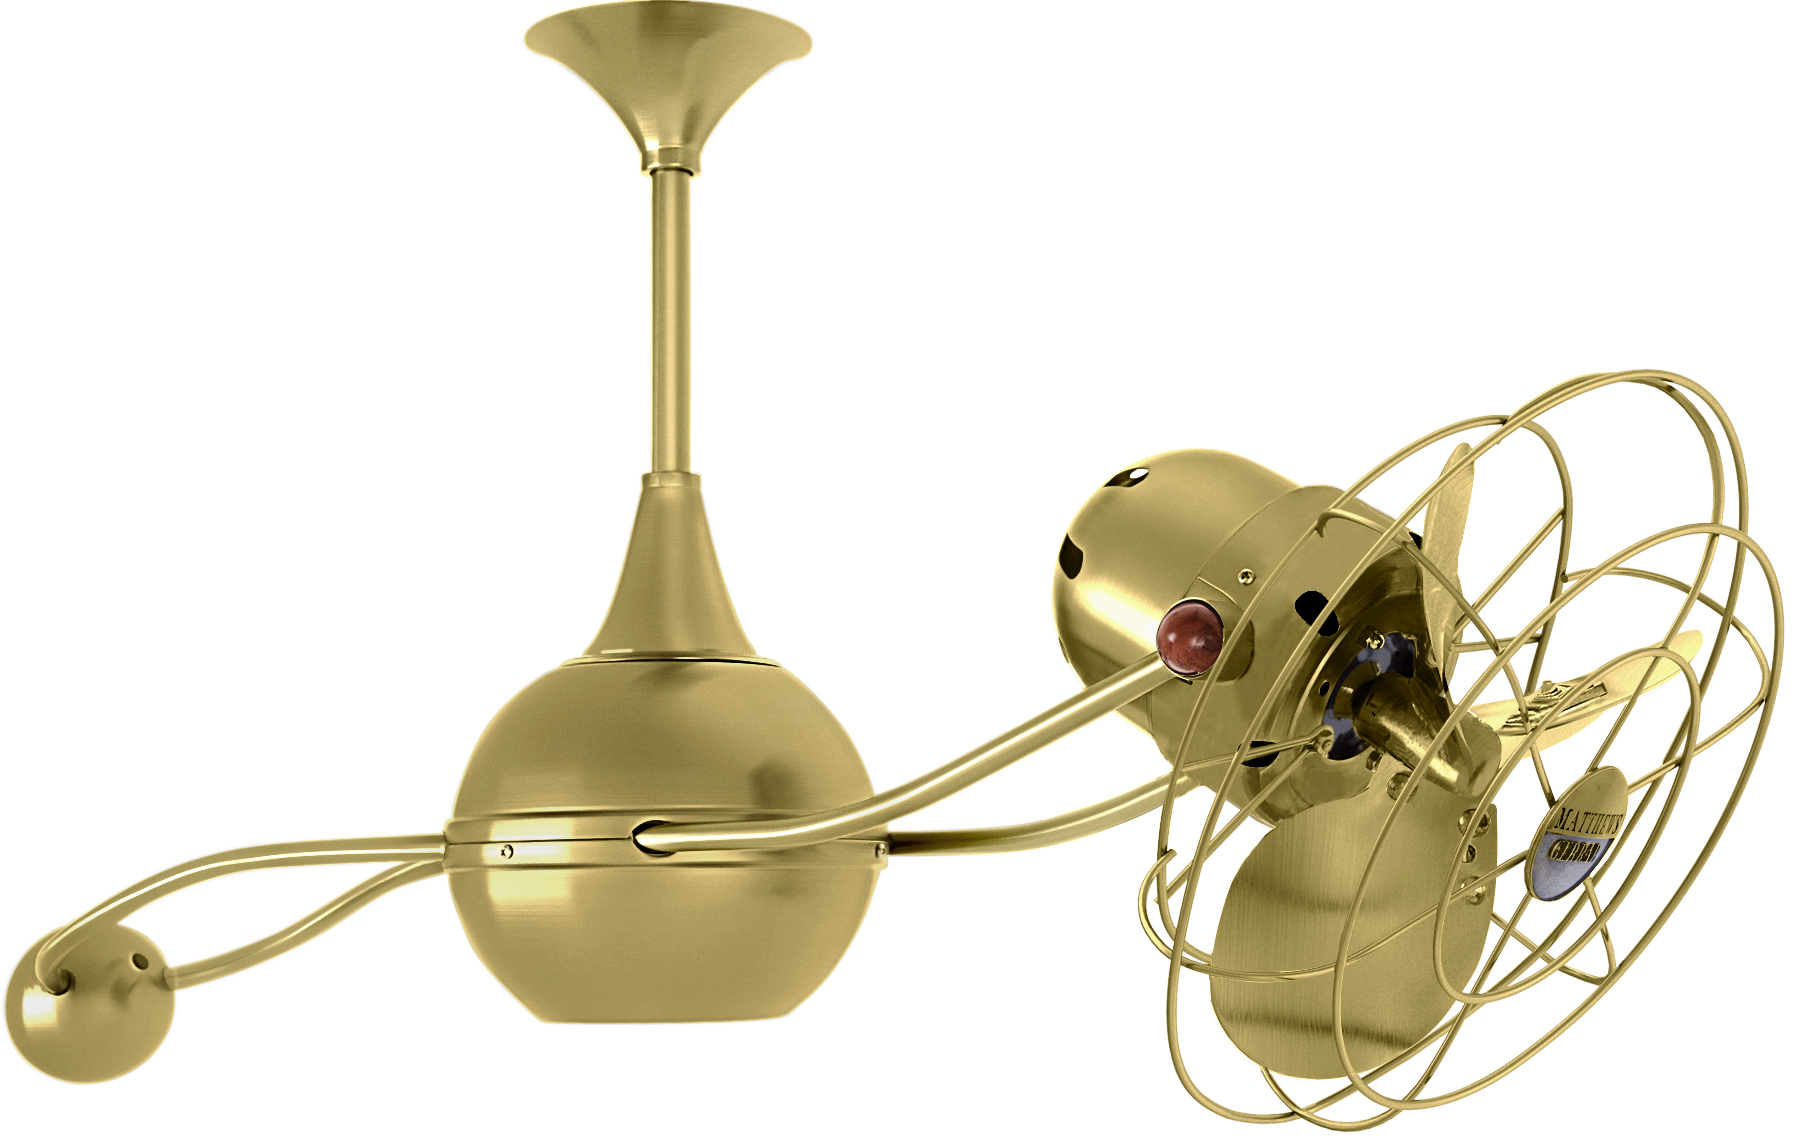 Brisa 2000 ceiling fan in brushed brass with metal blades in decorative cage made by Matthews Fan Company.